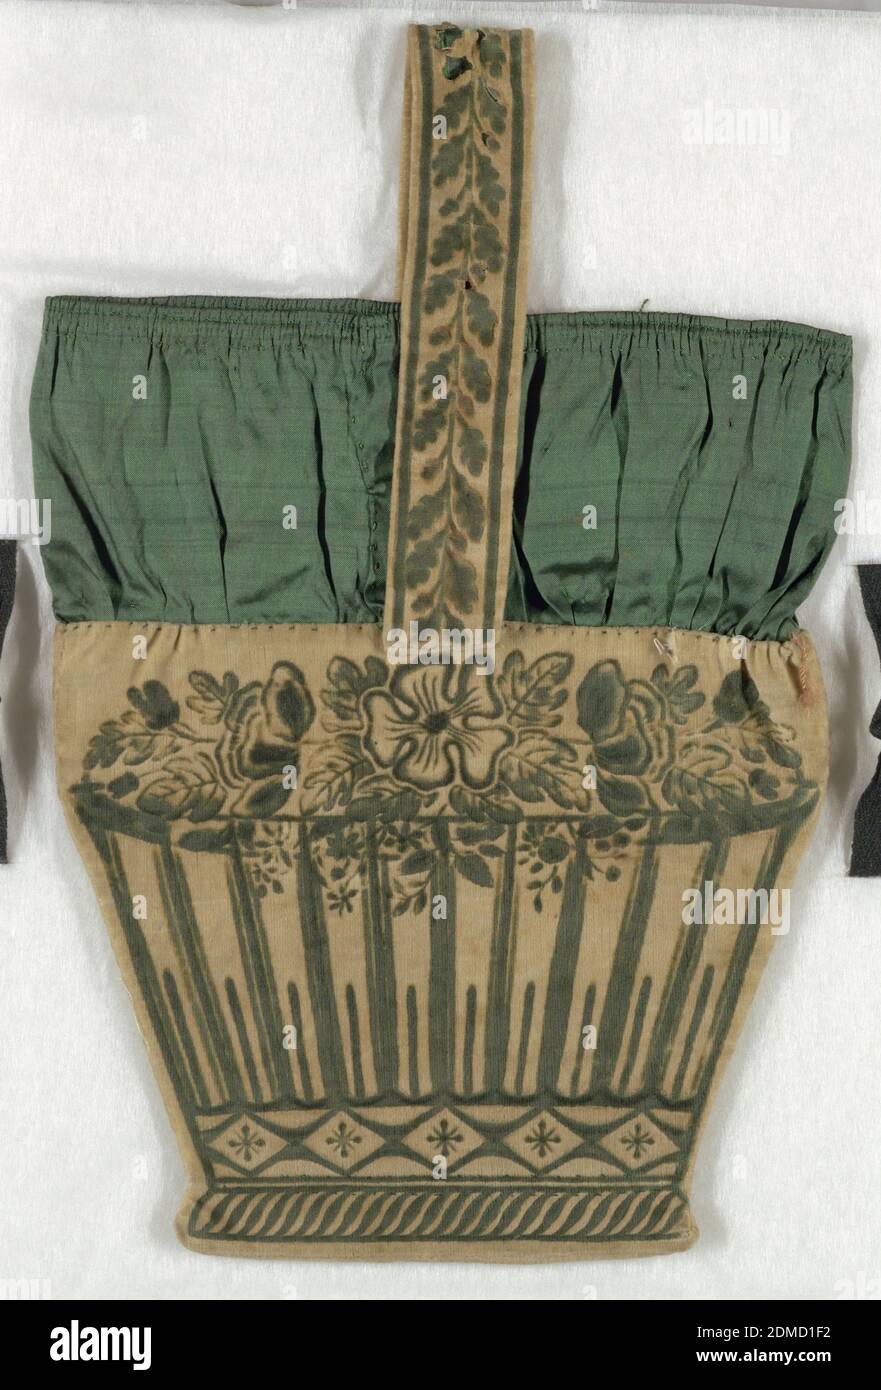 Bag, Medium: cotton, silk Technique: printed on velveteen, Bag of cream cotton velvet printed in imitation of a flower basket. Lined with green taffeta., England, 1800–1830, costume & accessories, Bag Stock Photo